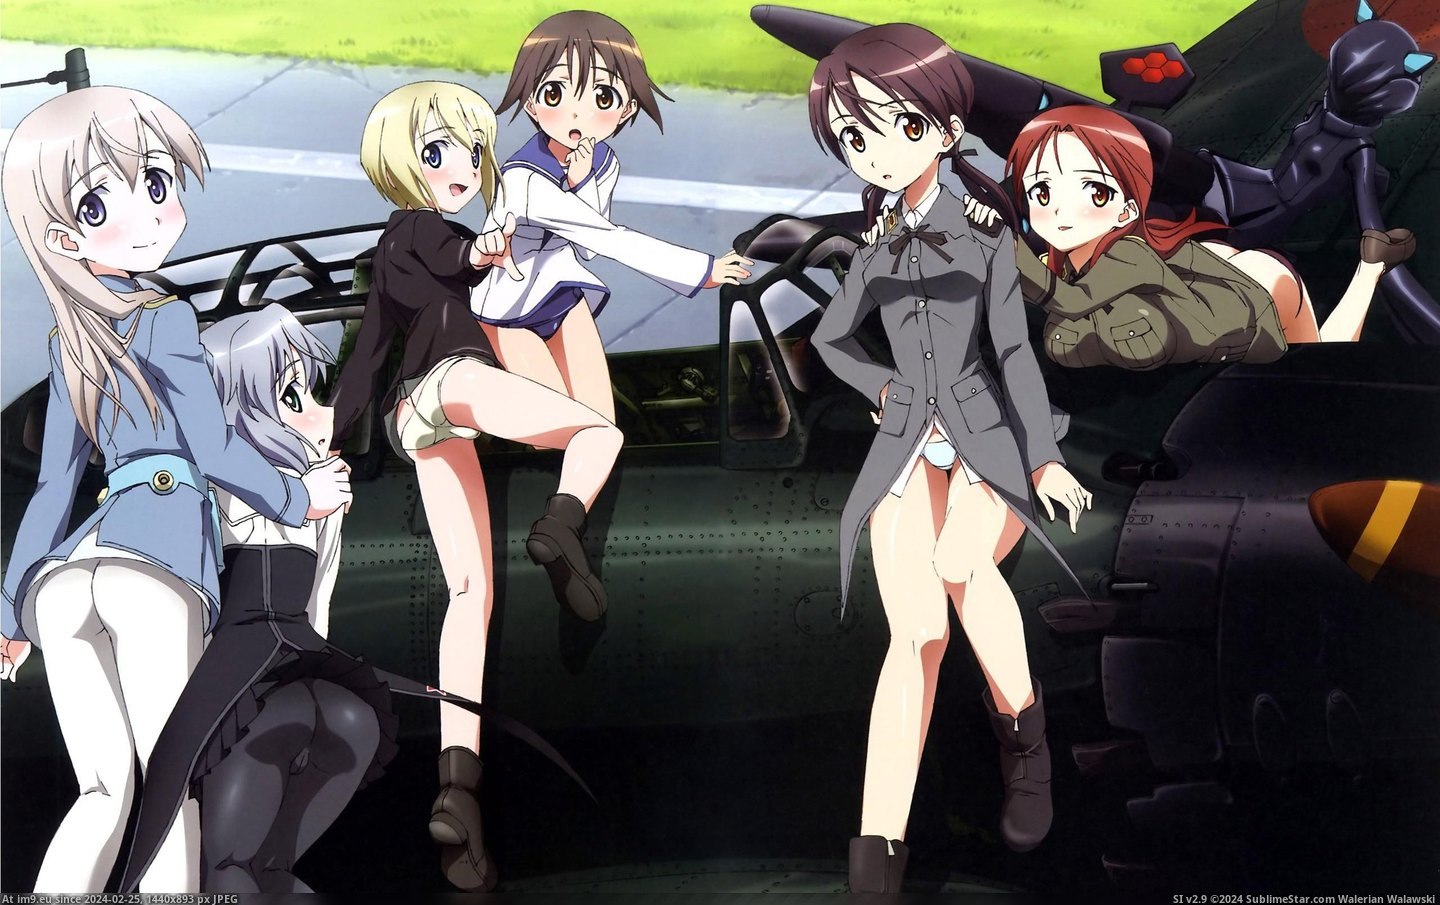 #Girls #Wallpaper #Witches #Anime #Strike Strike Witches Hd Anime Girls Wallpaper 61(1) (HD) Pic. (Obraz z album HD Wallpapers - anime, games and abstract art/3D backgrounds))